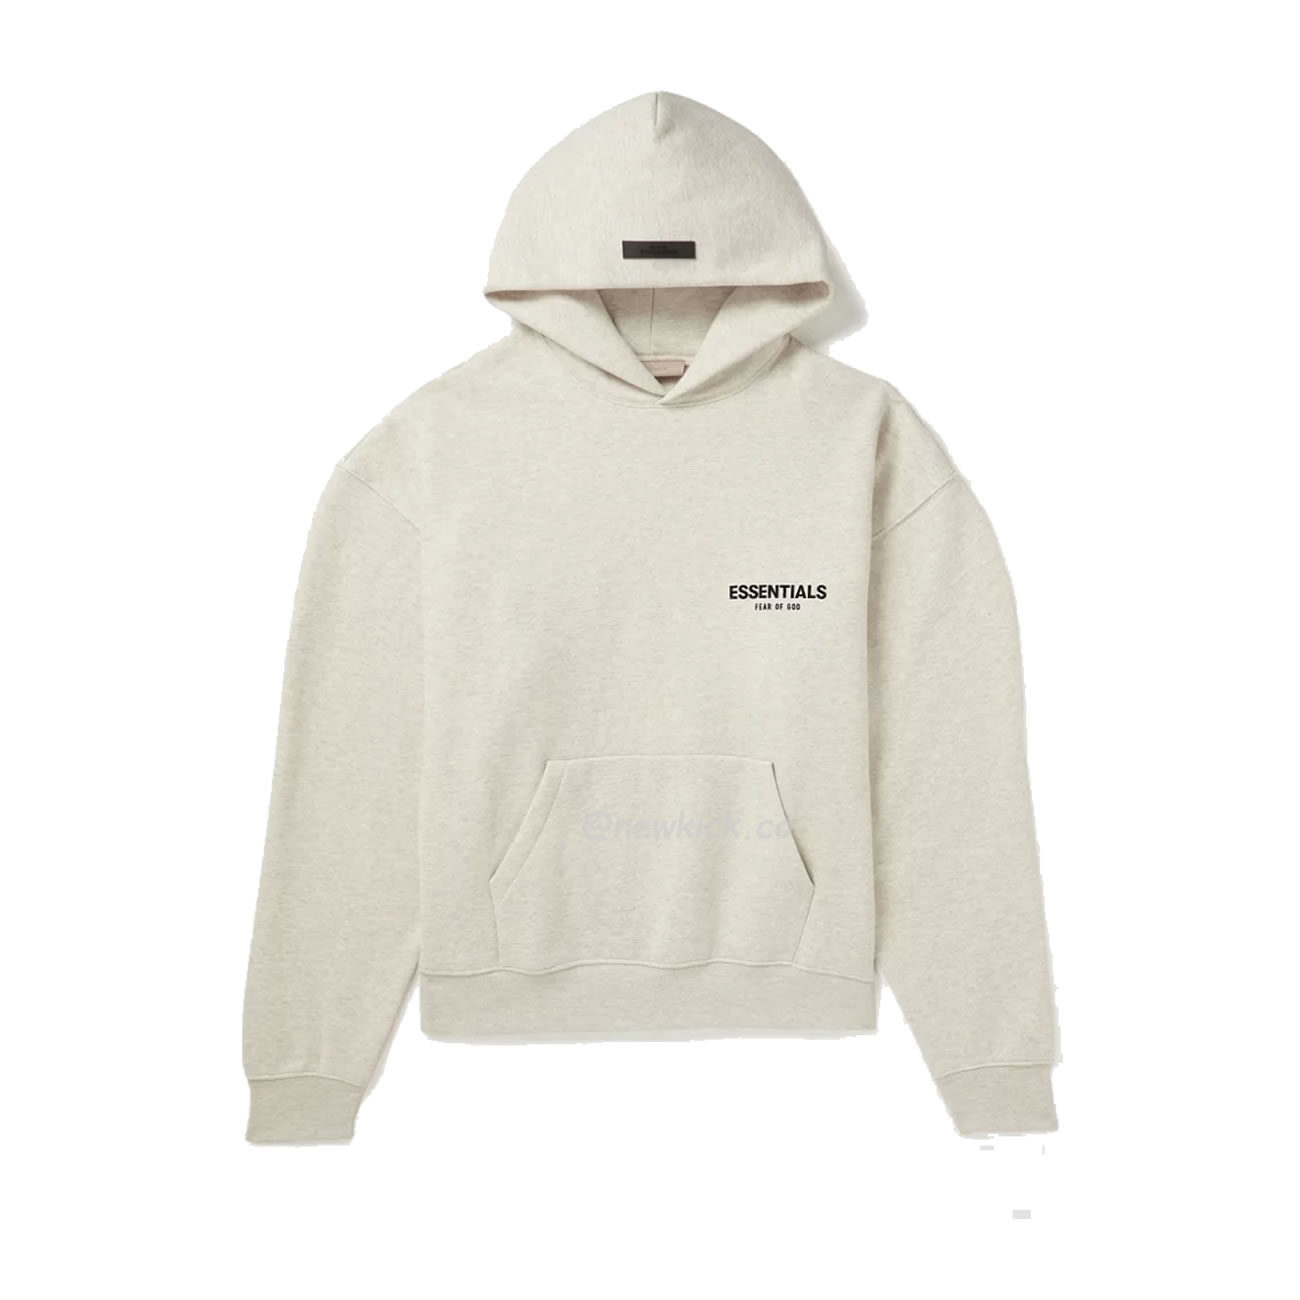 Fear Of God Essentials Core Collection Kids Pullover Hoodie Dark Heather Oatmeal (10) - newkick.org